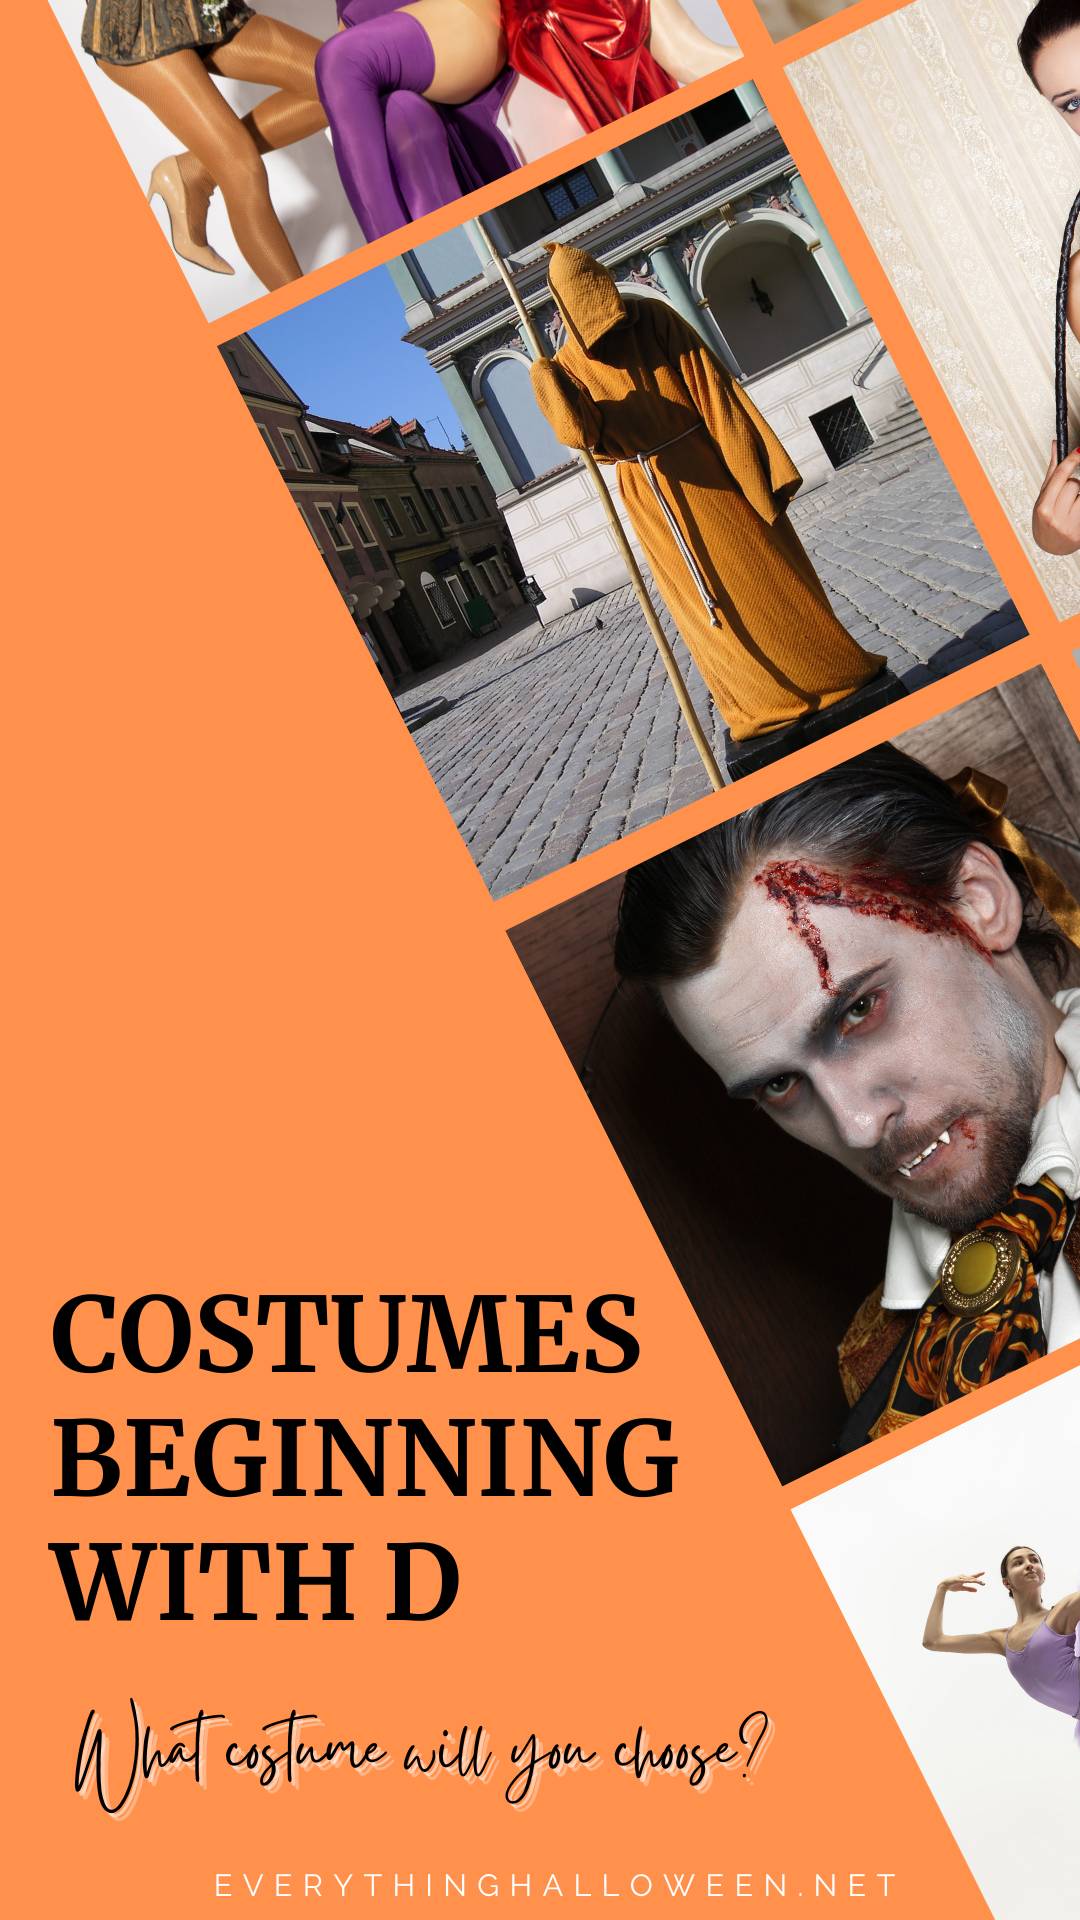 Costumes beginning with D